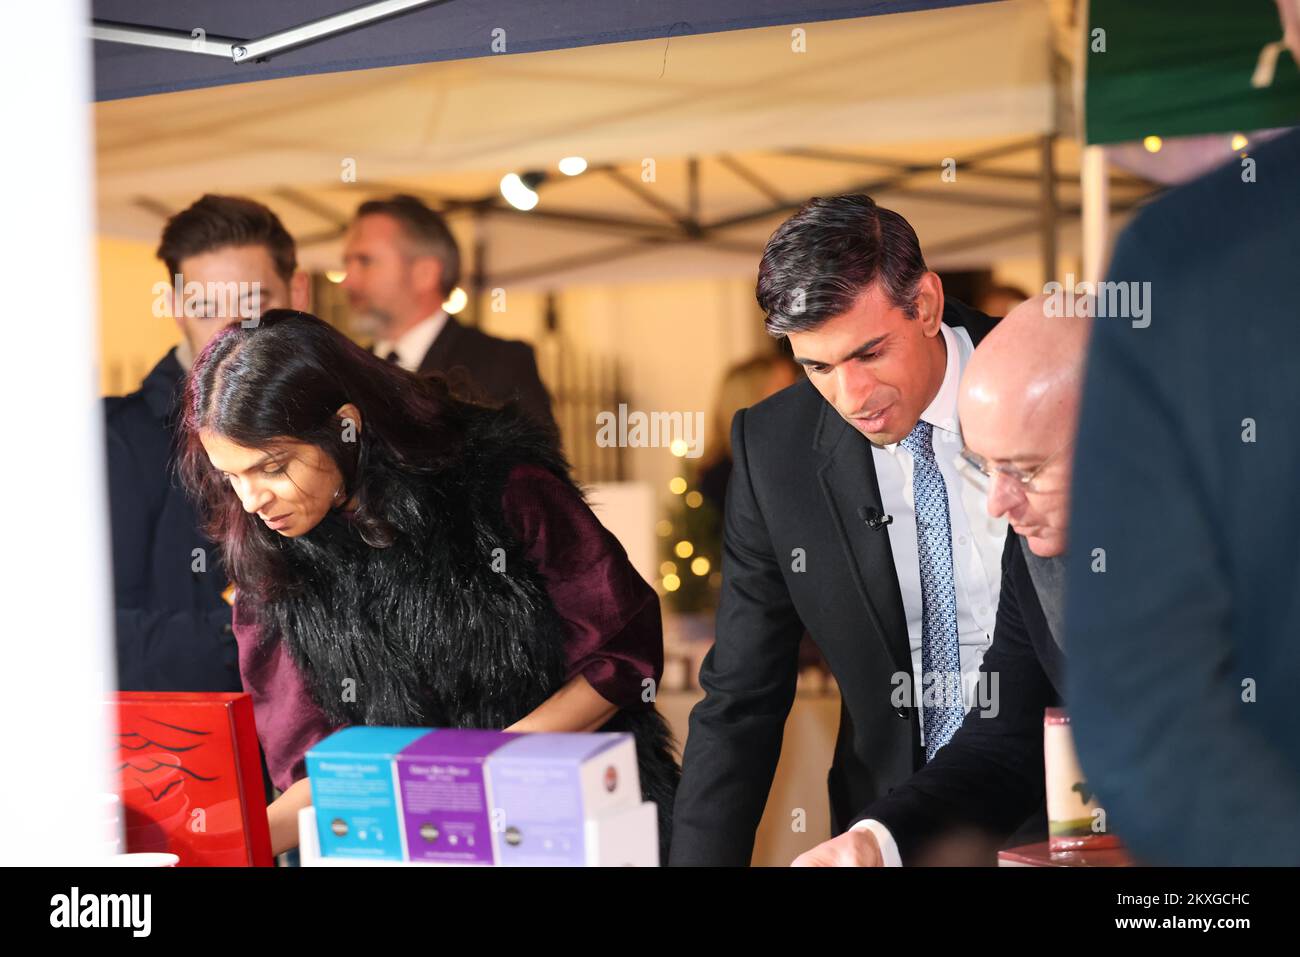 London, UK, 30th November 2022. Small businesses set up stalls outside number 10 for the Downing Street Festive Showcase. Rishi Sunak and his wife Akshata Murthy came out and enjoyed chatting to stallholders and sampling products, edible and scented! Credit: Monica Wells/Alamy Live News Stock Photo